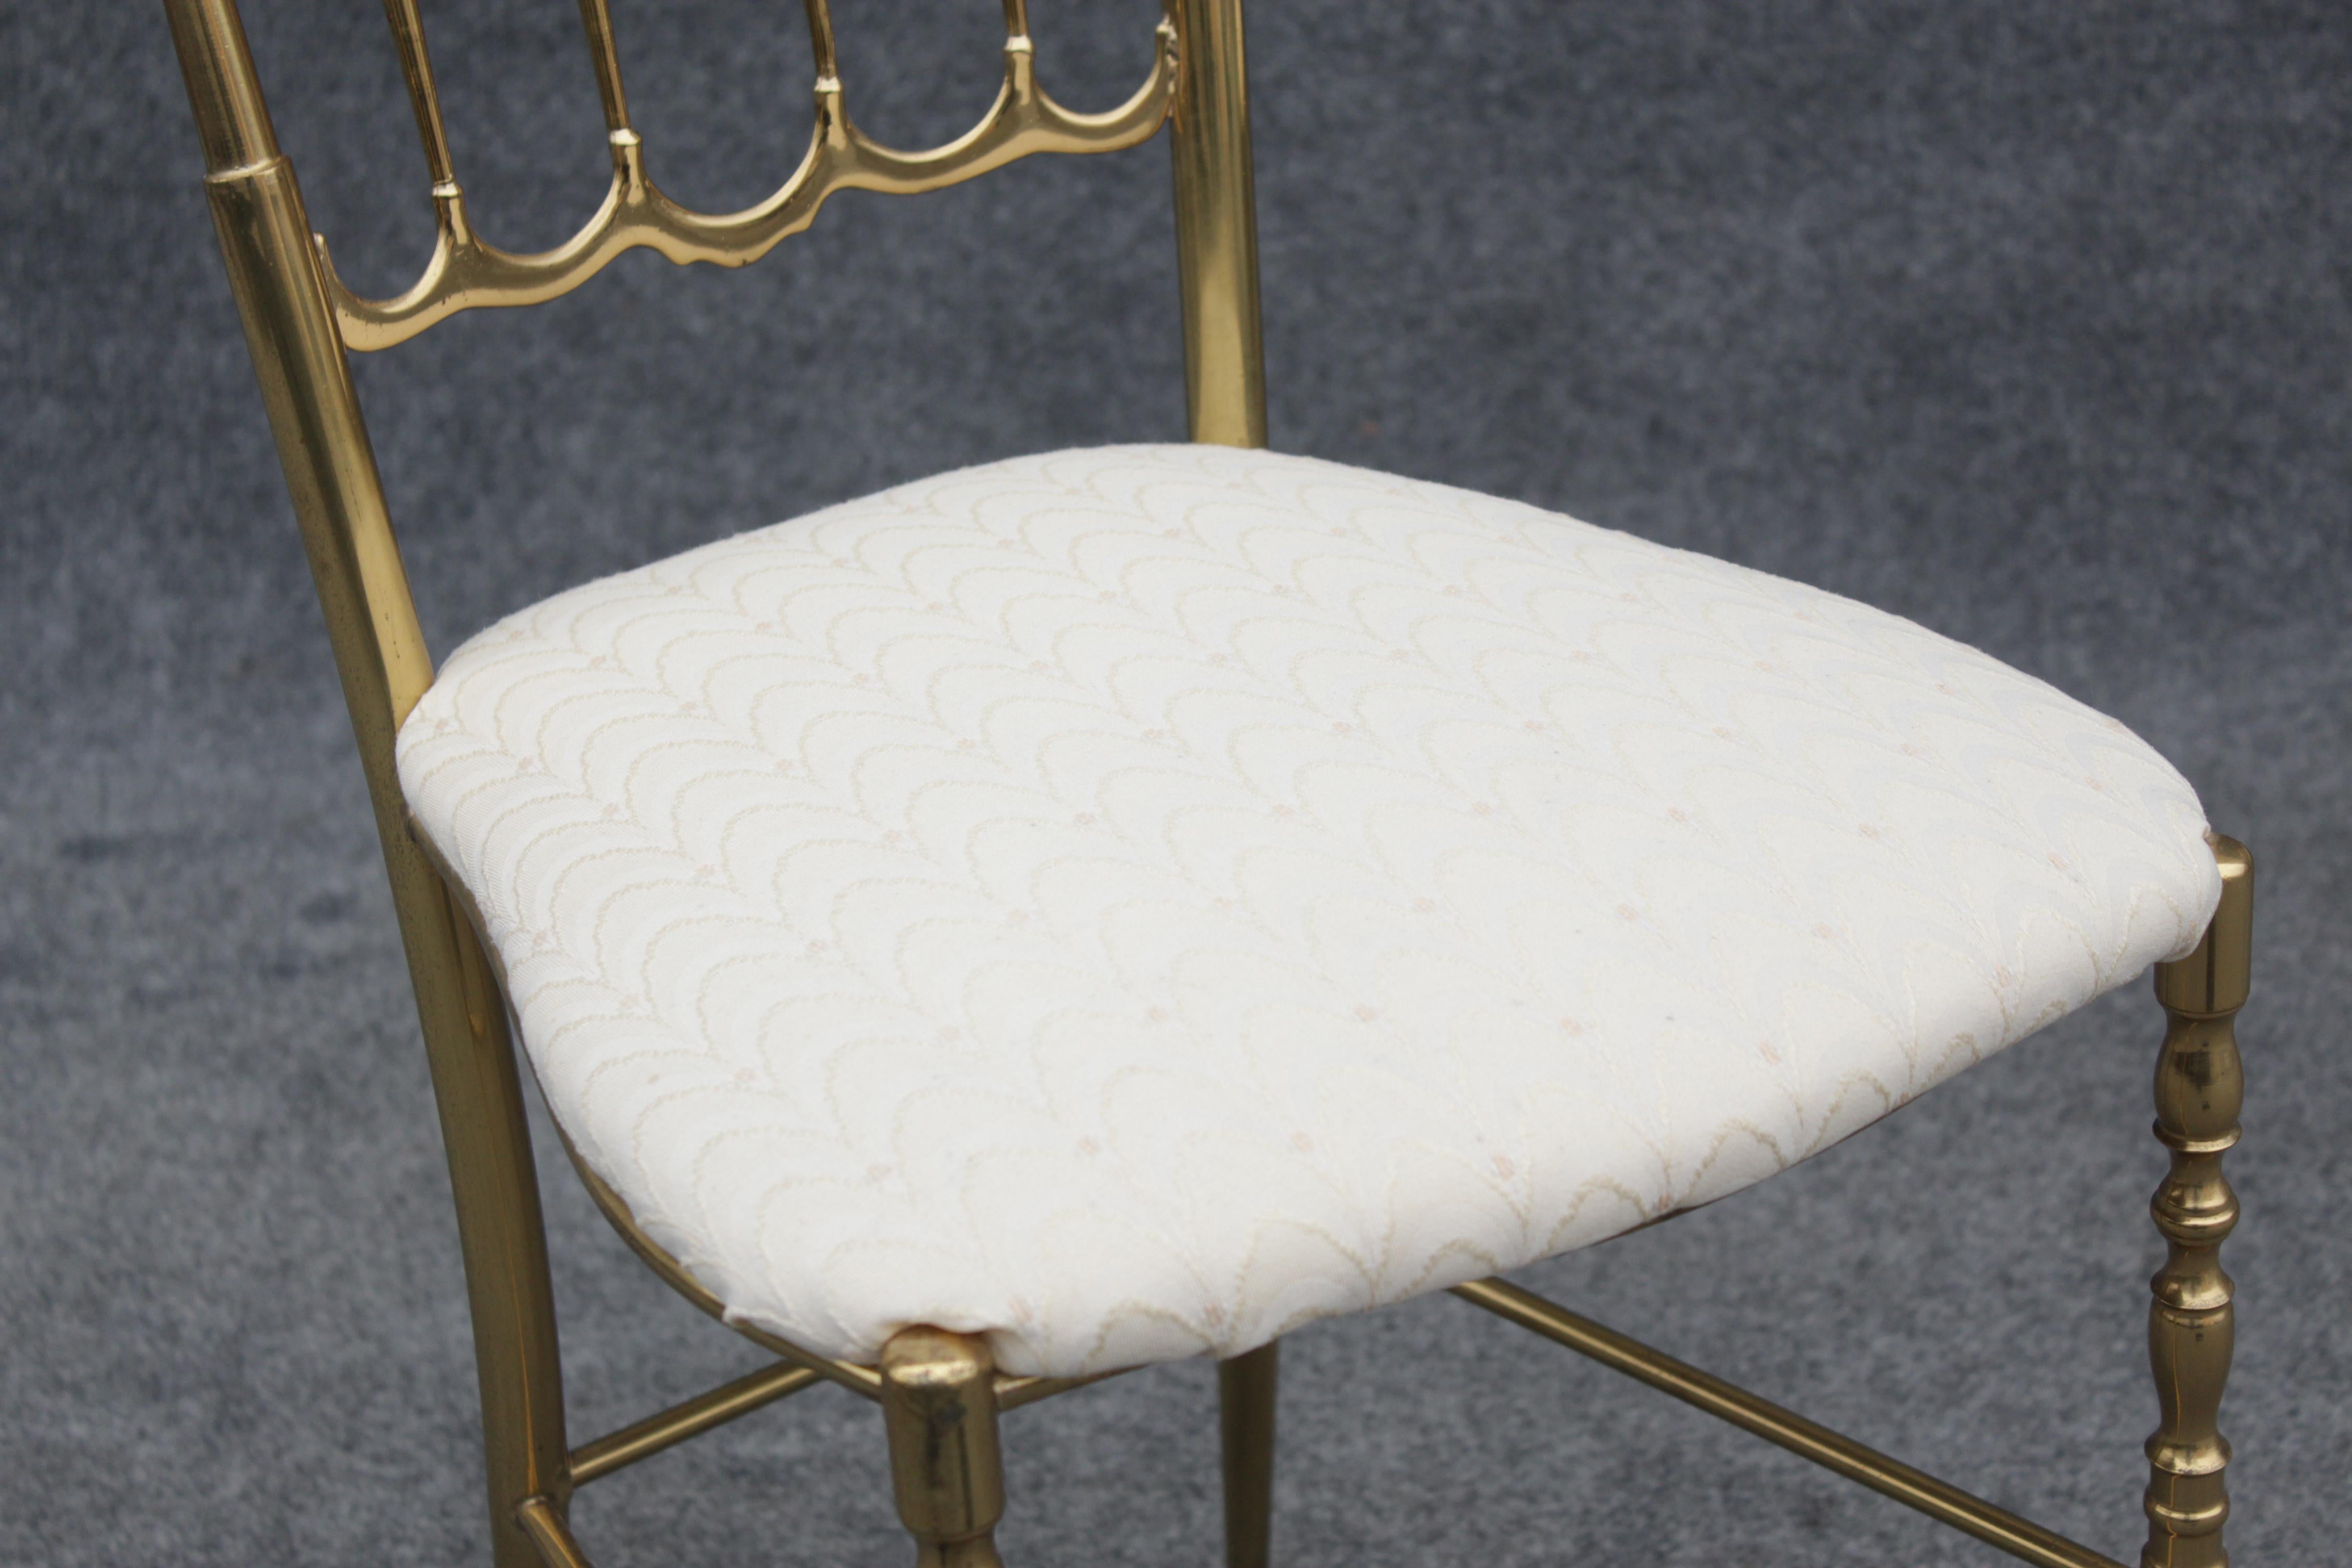 Pair of Solid Brass & White Upholstered Dining or Side Chairs by Chiavari Italy For Sale 11